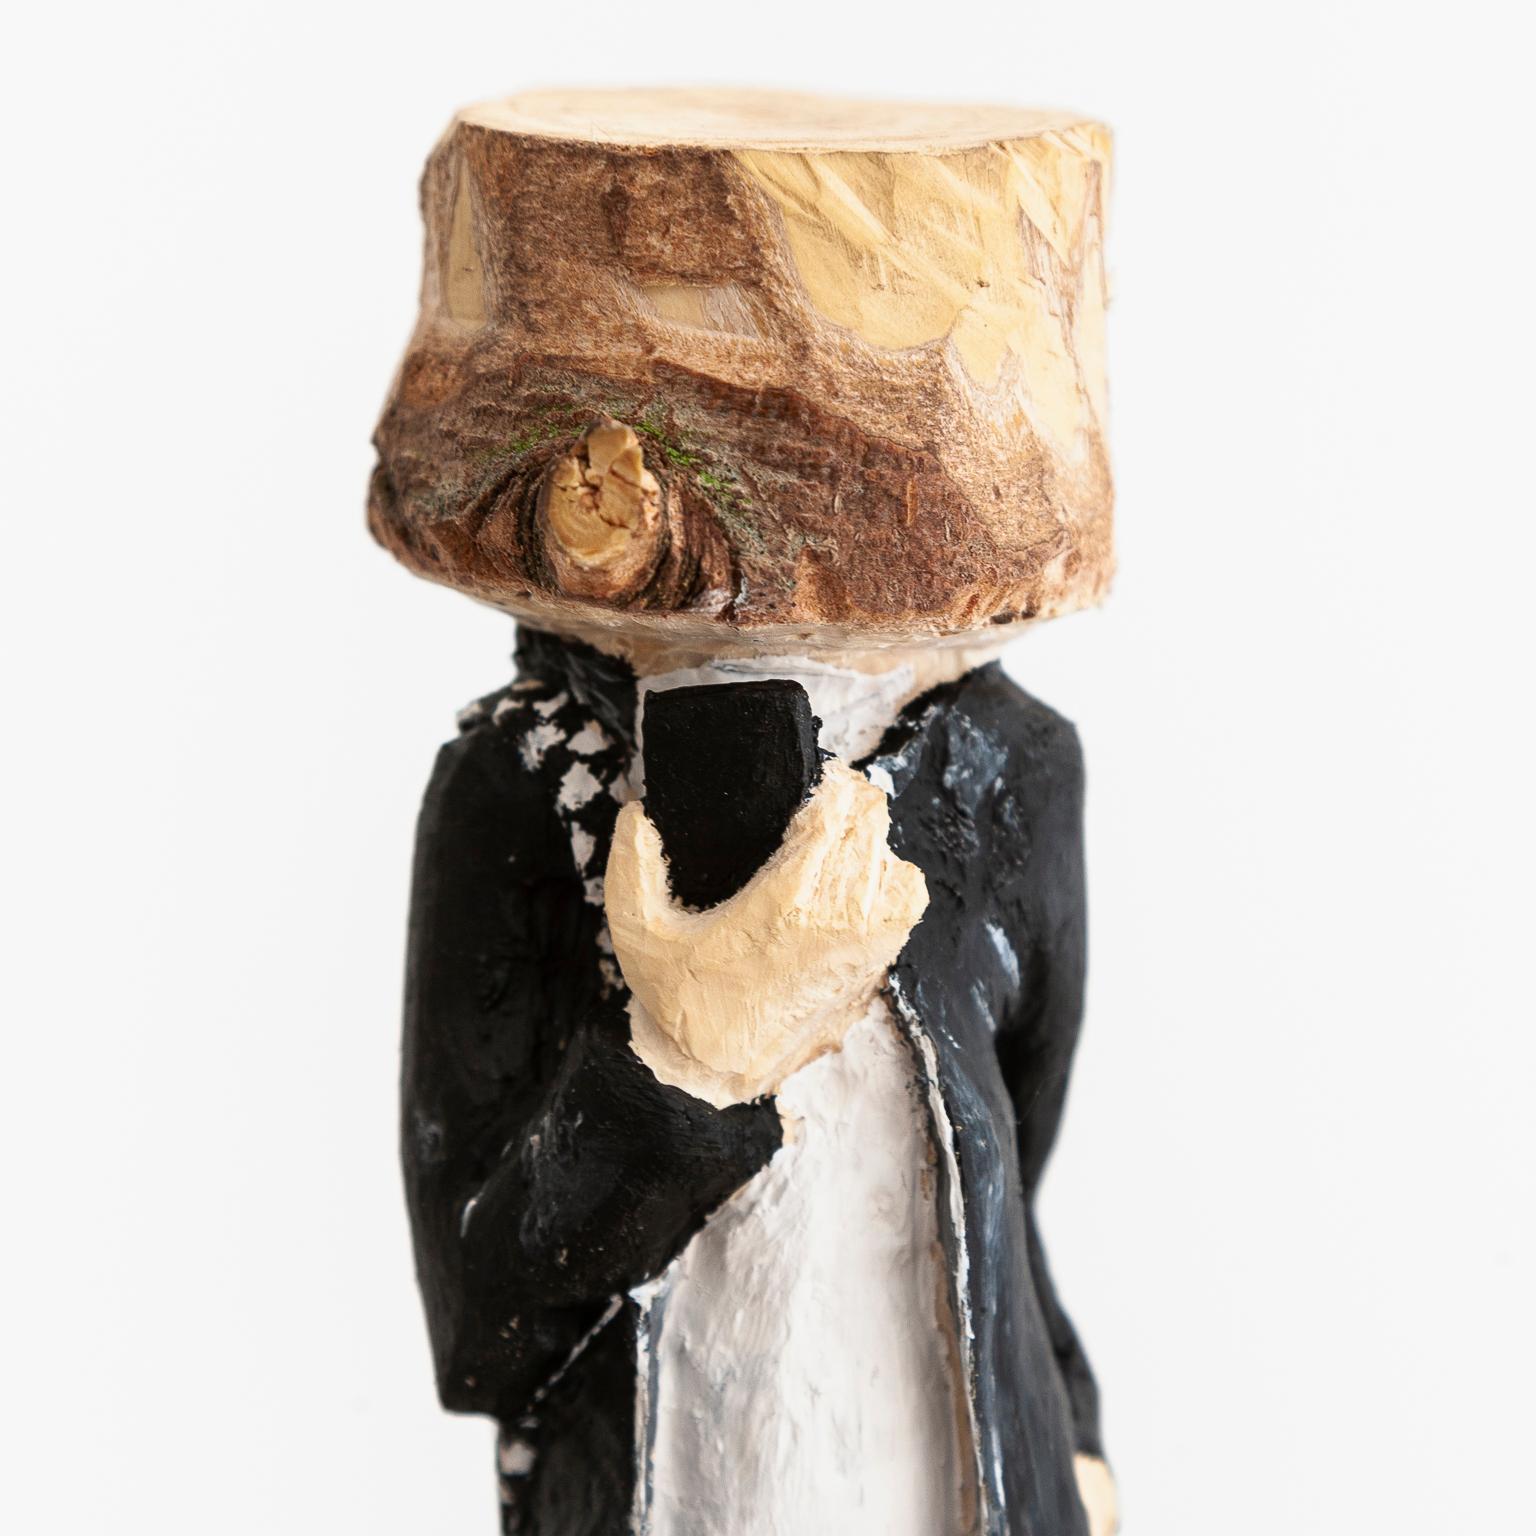 Current works from the series „shaped“:
Hand-carved wooden figures - made of spruce, finished with acrylic and/or  wood stain. 
